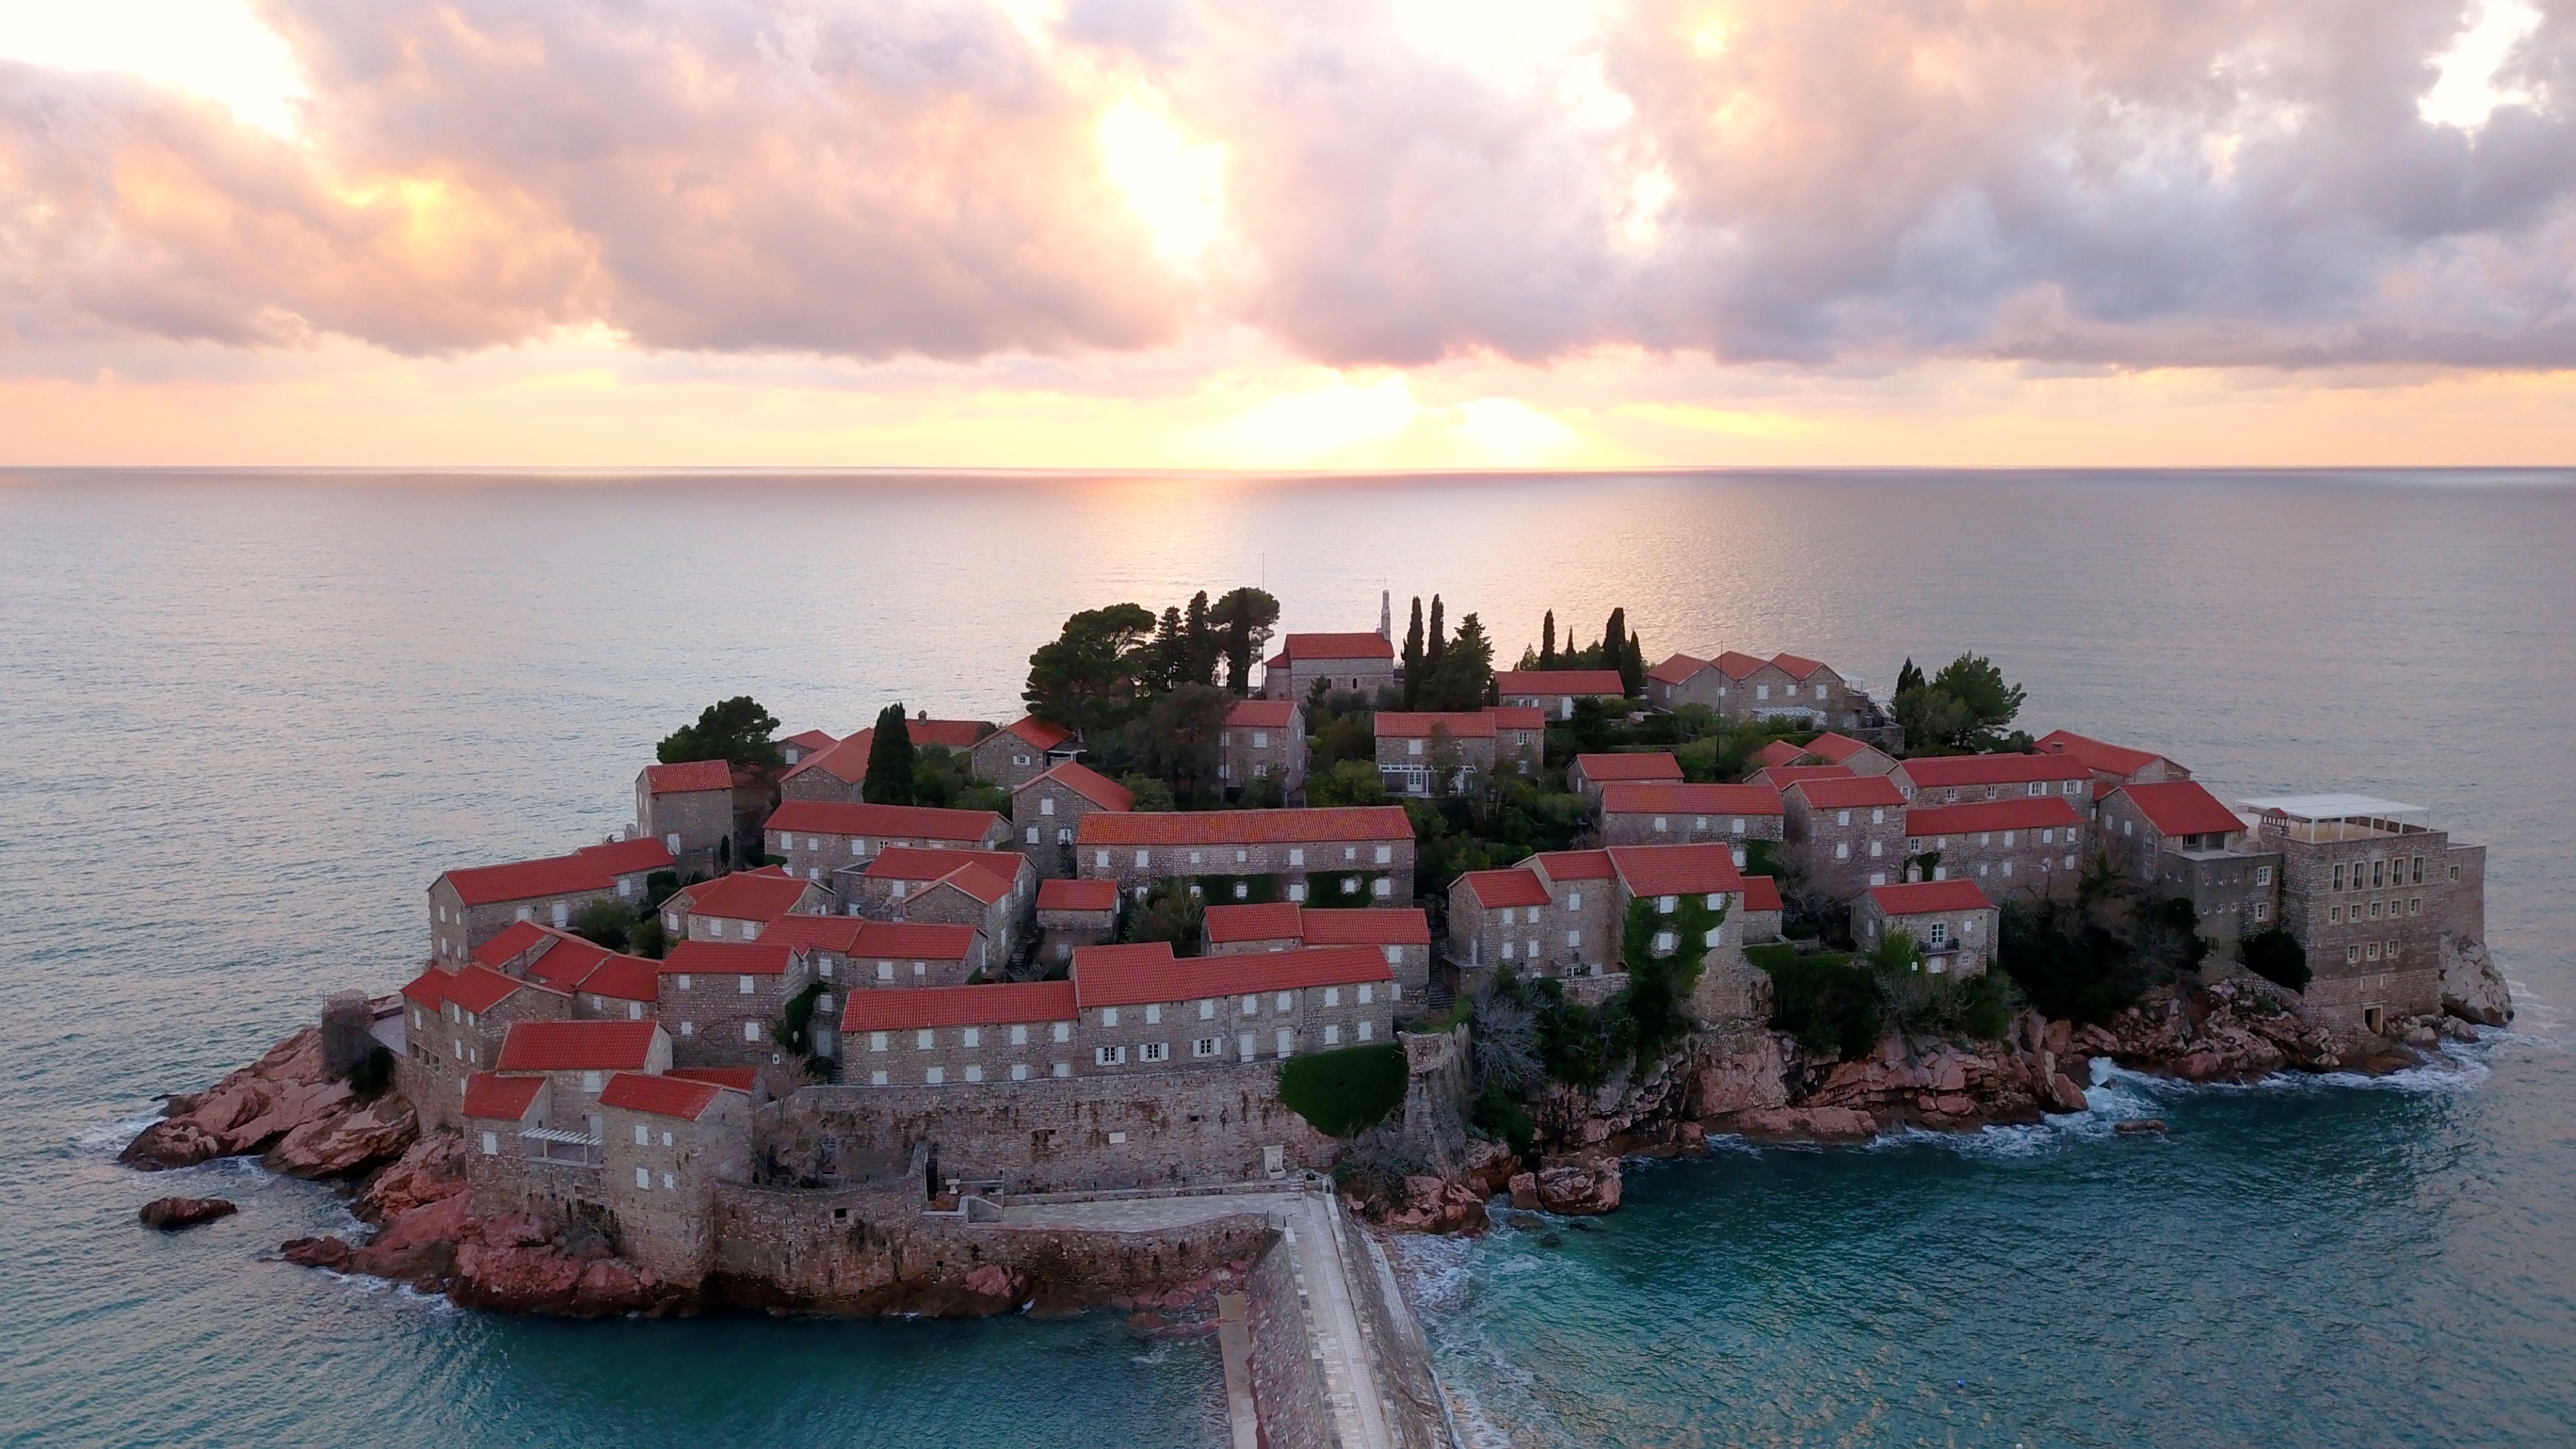 Our first stop is at  Sveti Stefan